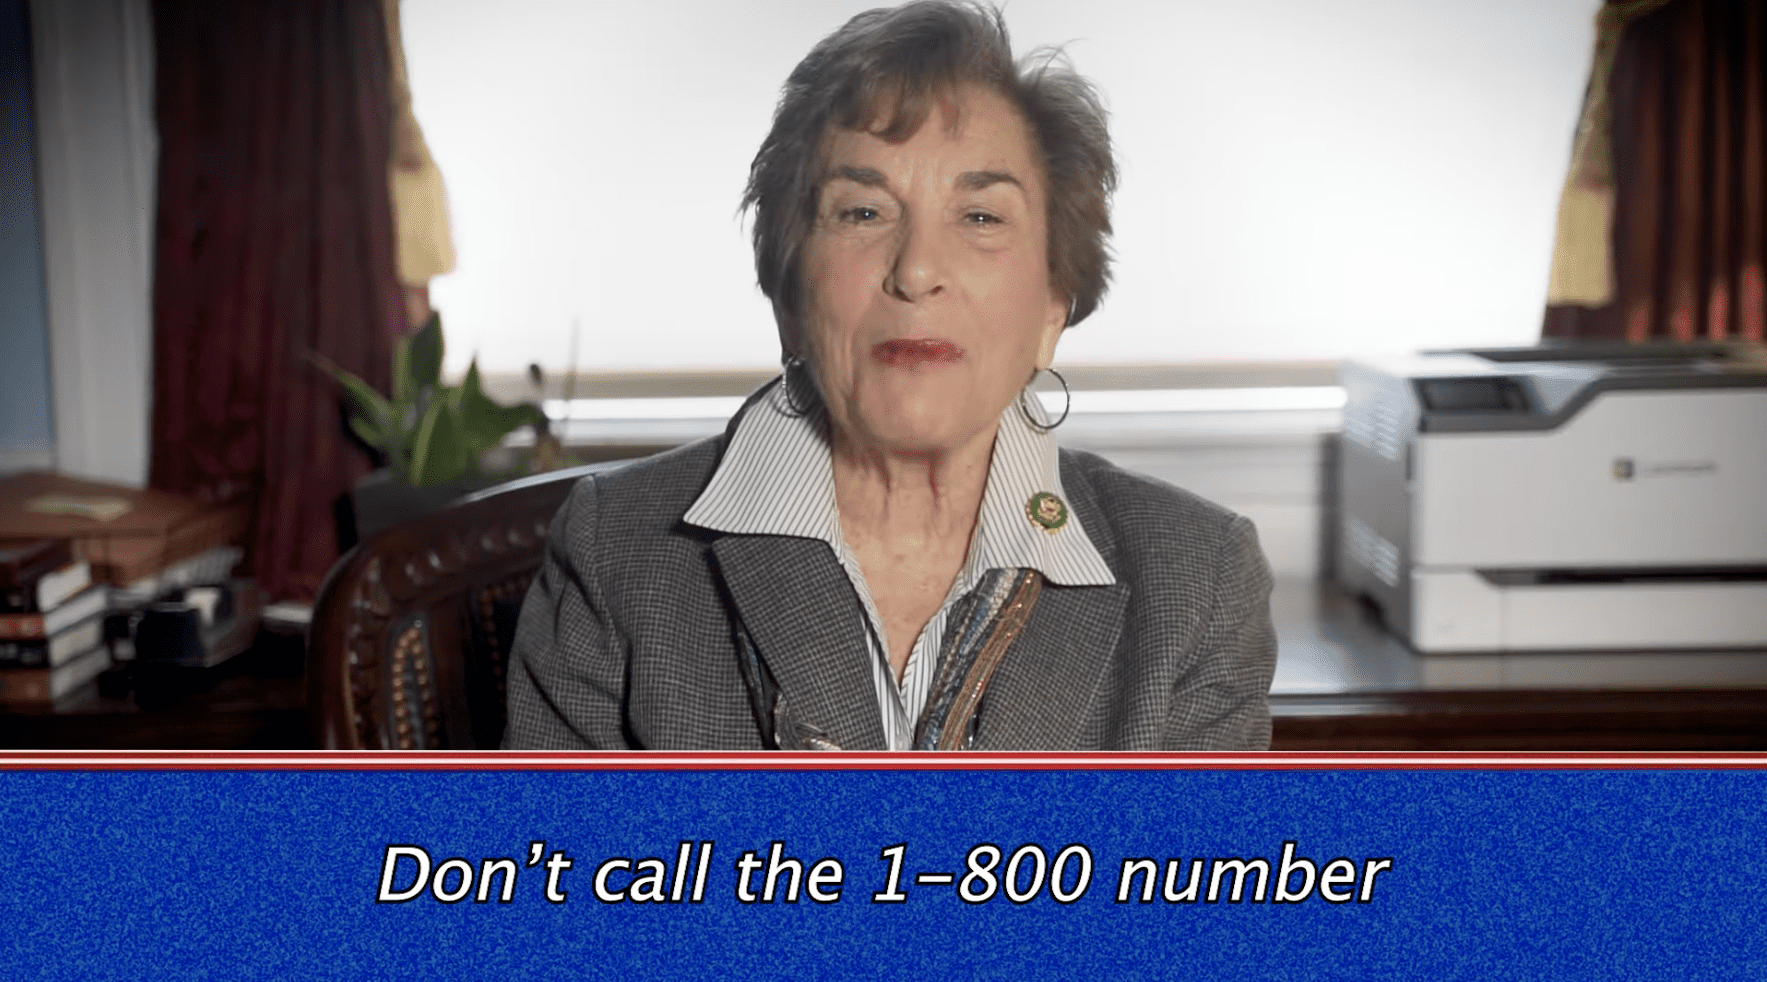 Congresswoman Schakowsky is one of several House members supporting the Save Medicare Act, which aims to relabel Medicare Advantage as Alternative Private Health Plans.